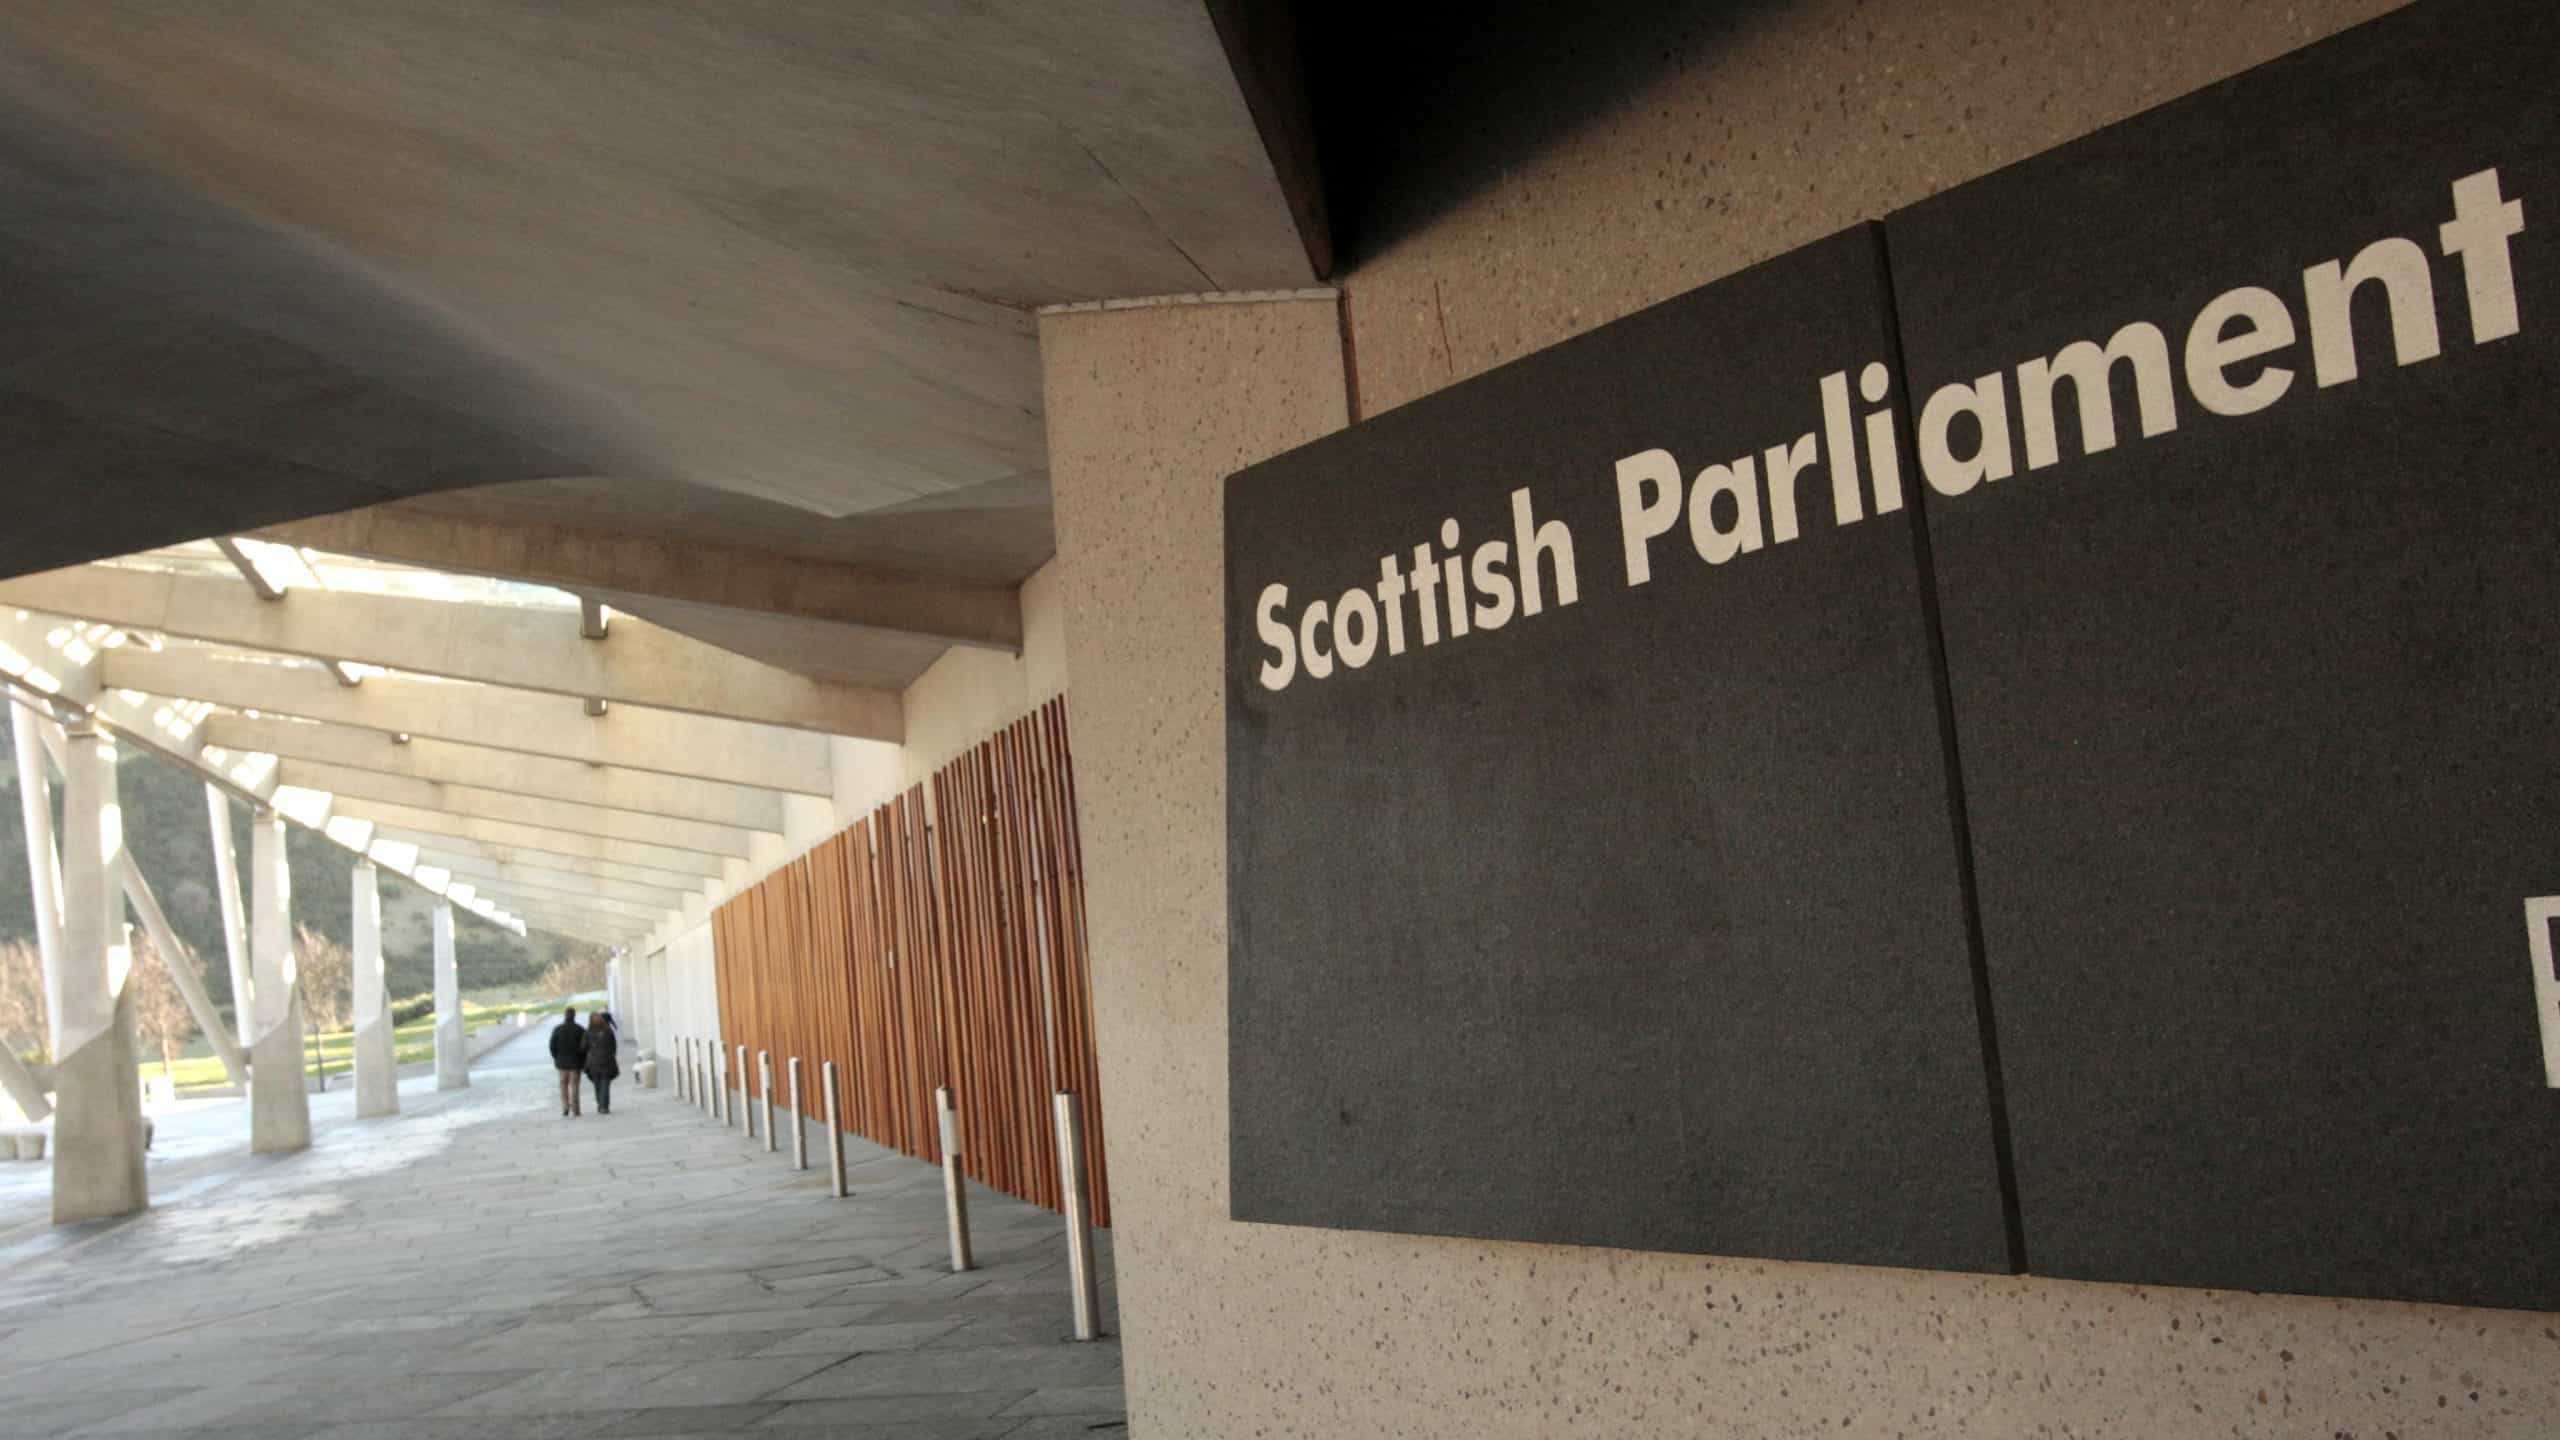 SNP treasurer arrested by Scotland Police as part of investigation into party’s finances